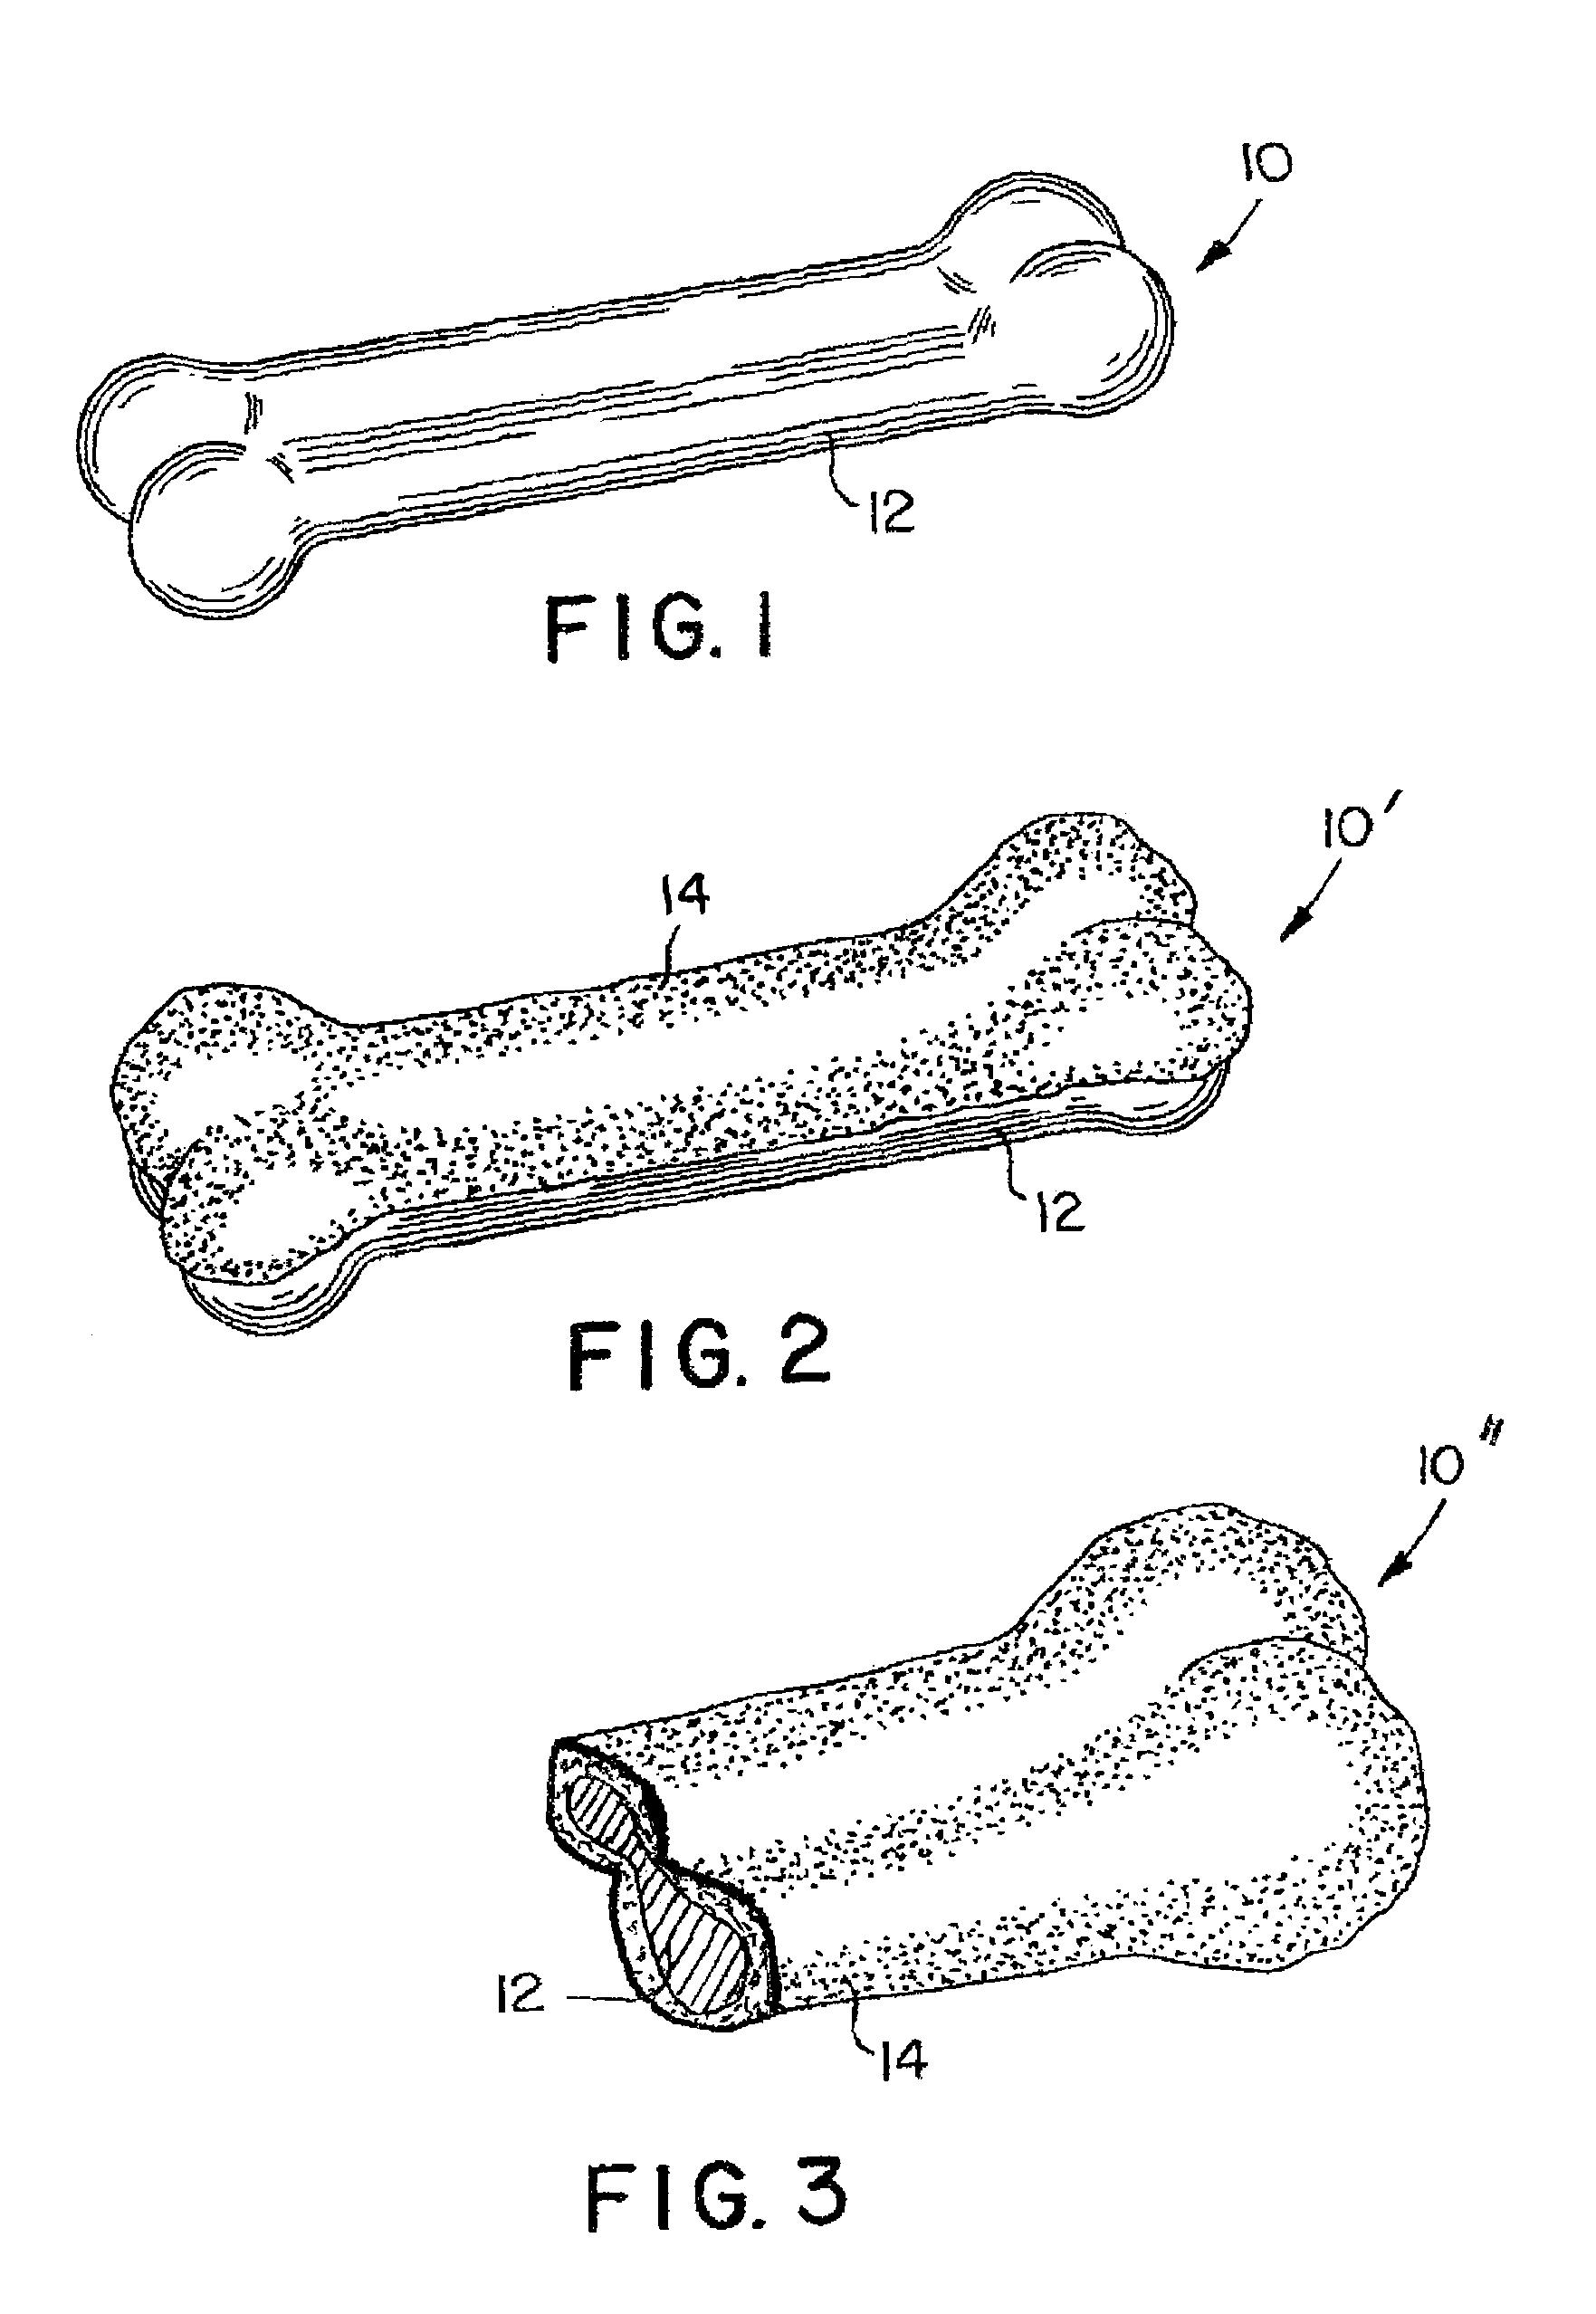 Processes for forming multi-layered pet treats